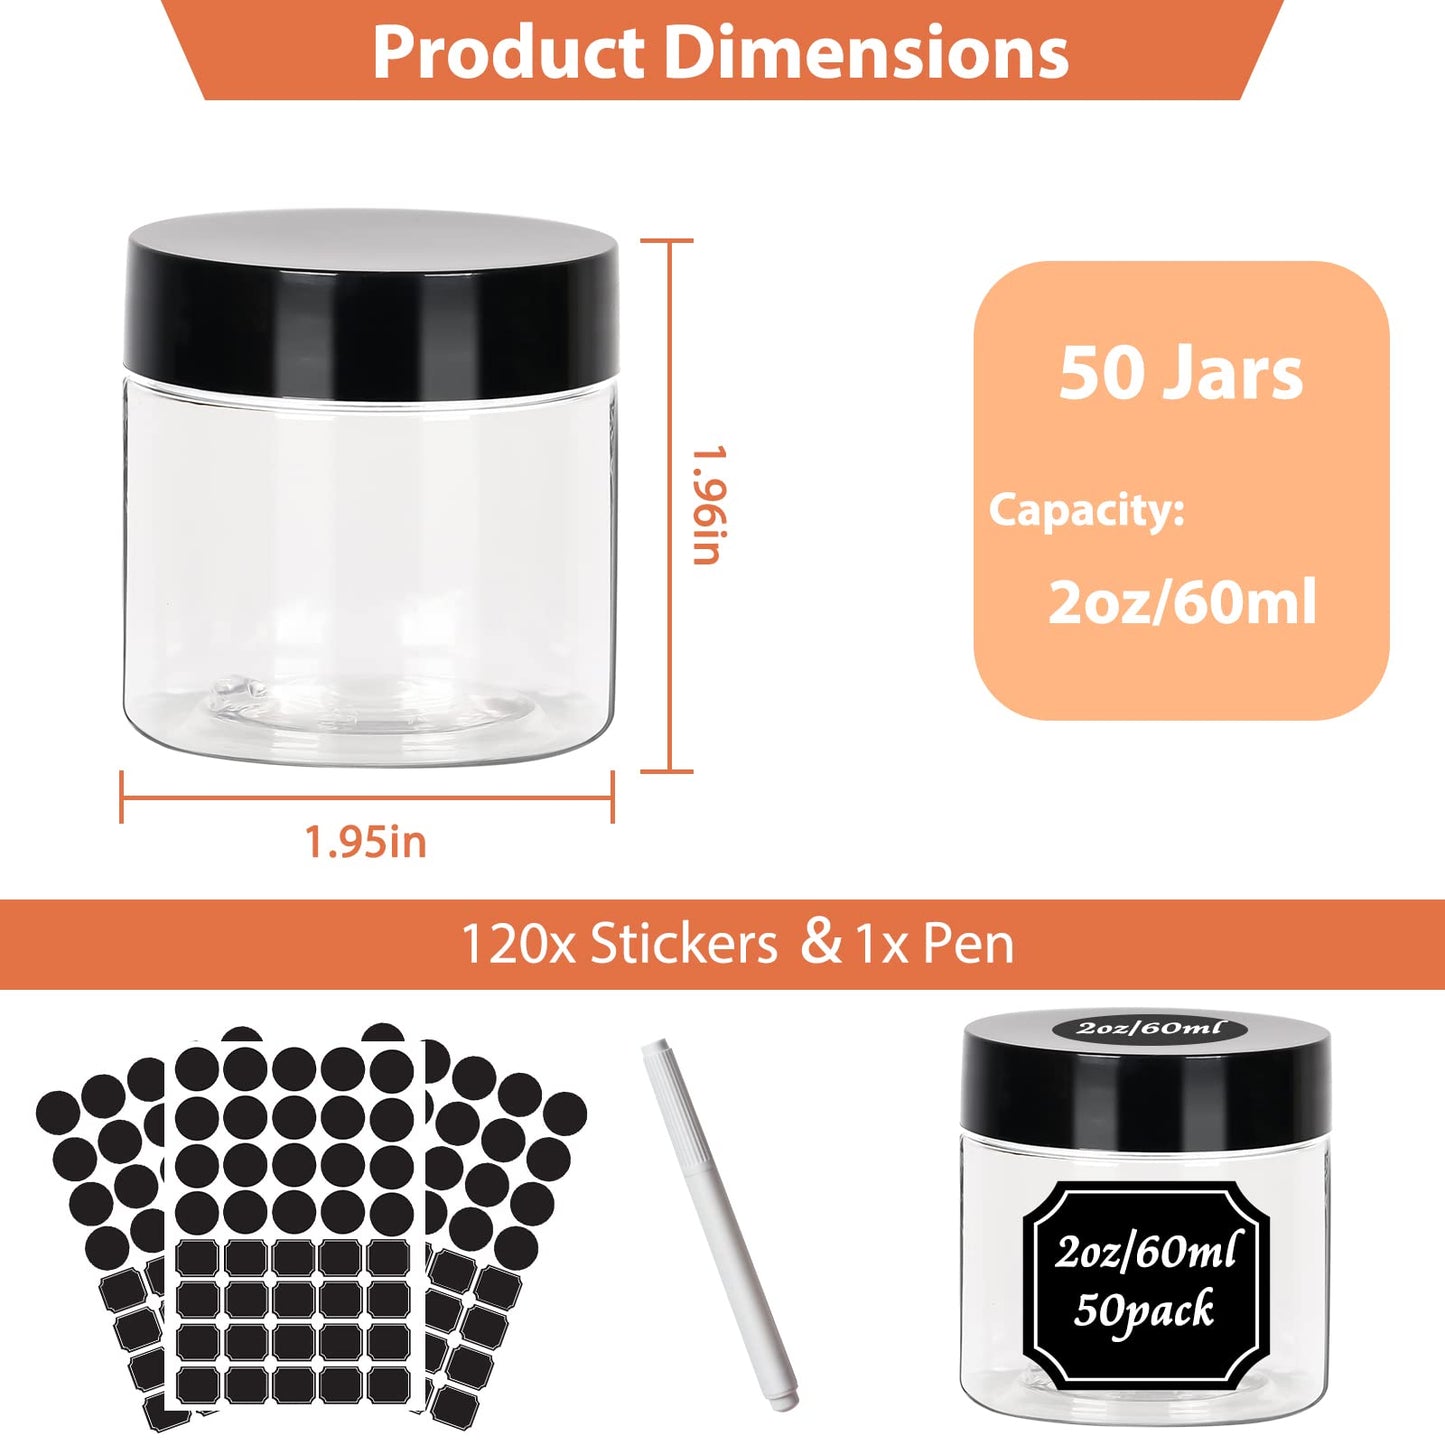 50pcs 2 oz Clear Plastic Round Jars with Black Lids, 2oz 60ml Leak-Proof Wide-Mouth Cosmetic Storage Containers for Kitchen Use, Beauty Products, Cream, Scrubs, Bath Salt and More